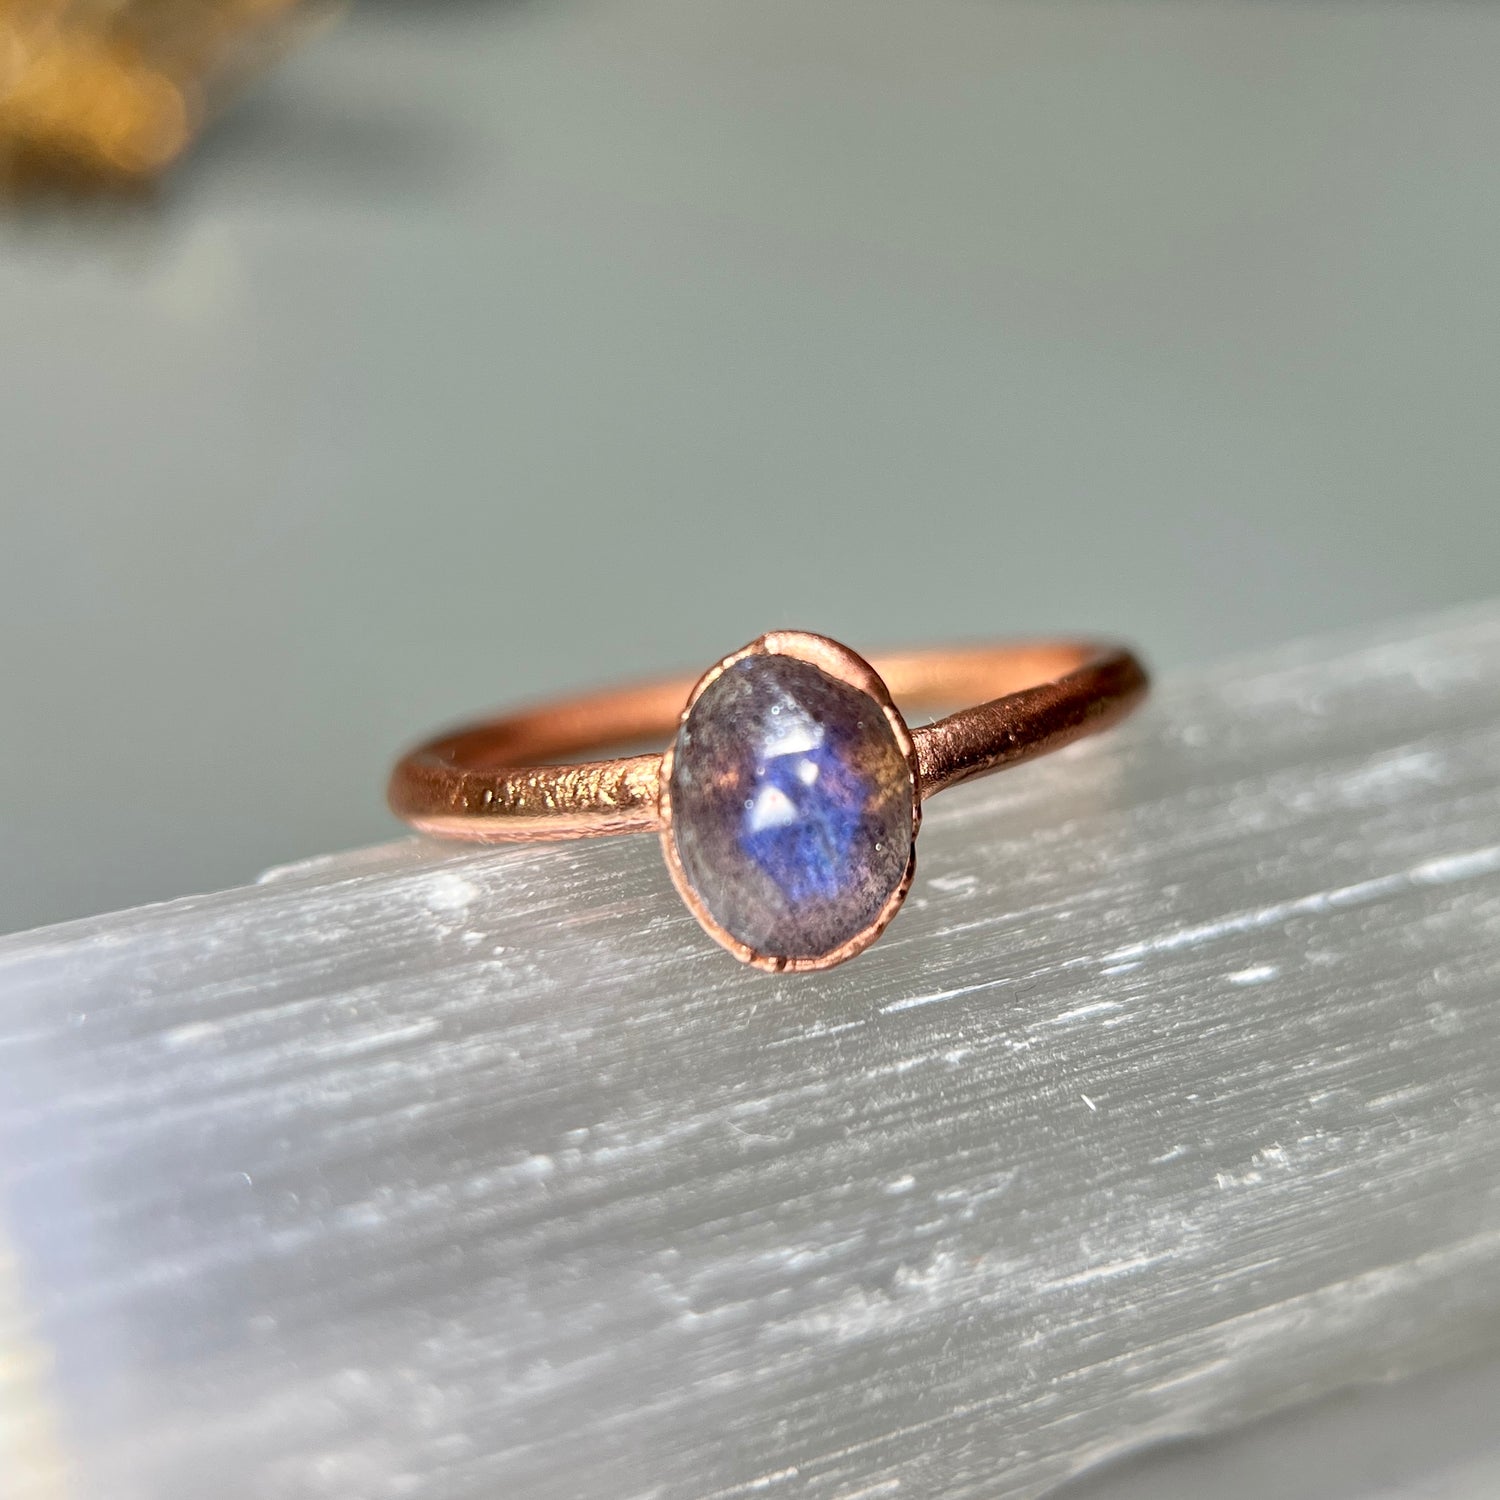 Healing crystal solitaire ring oval faceted Labradorite stone